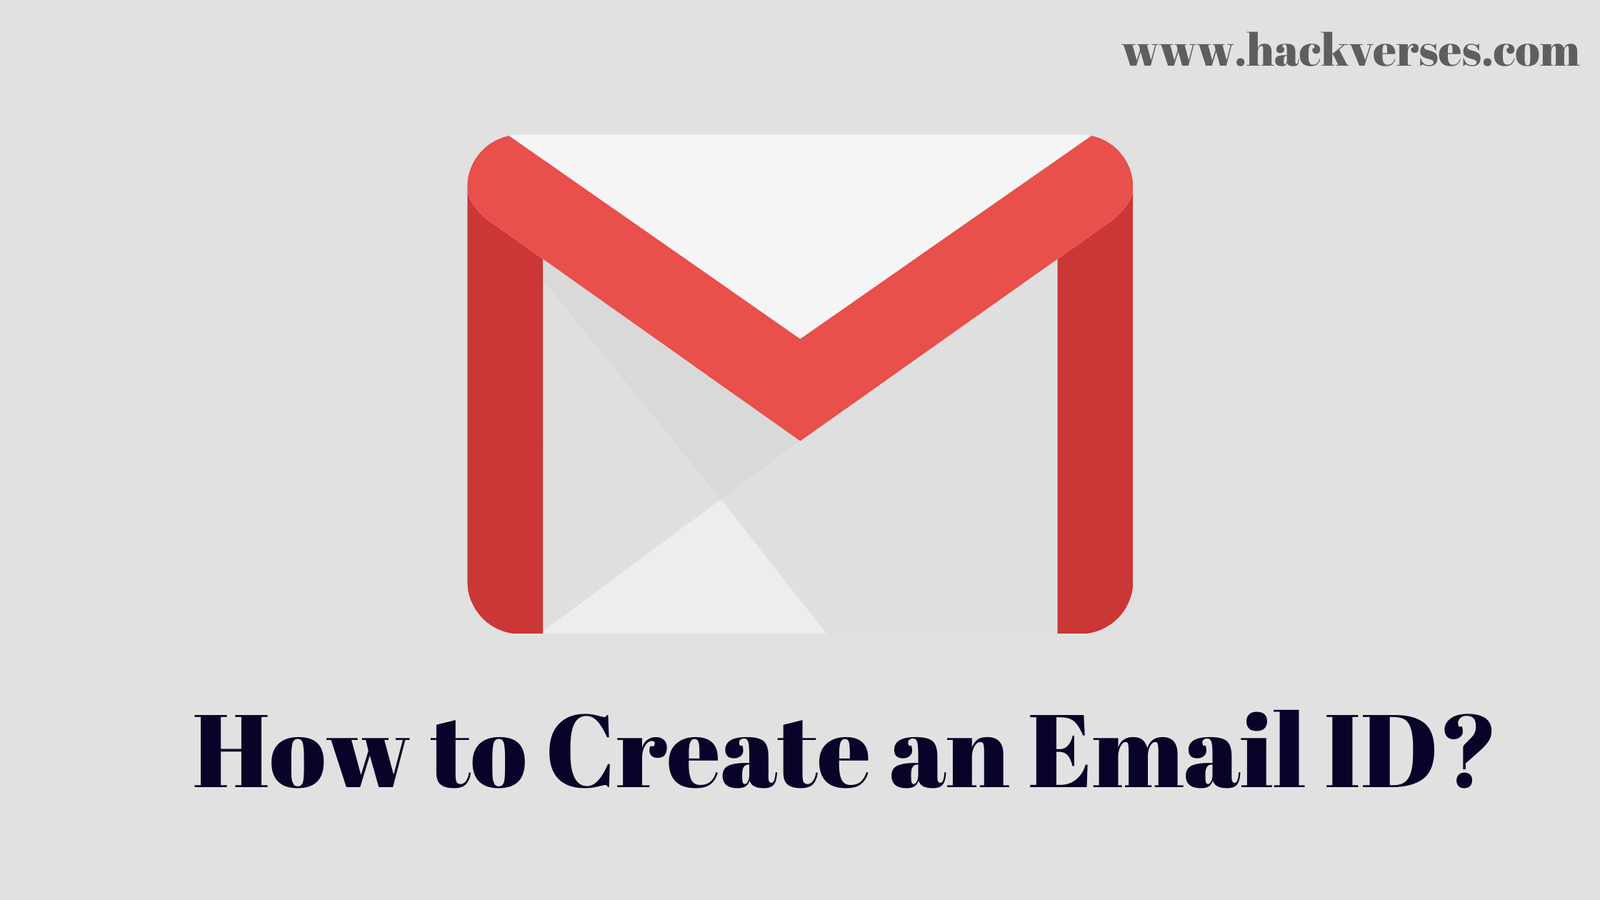 How to Create an Email ID